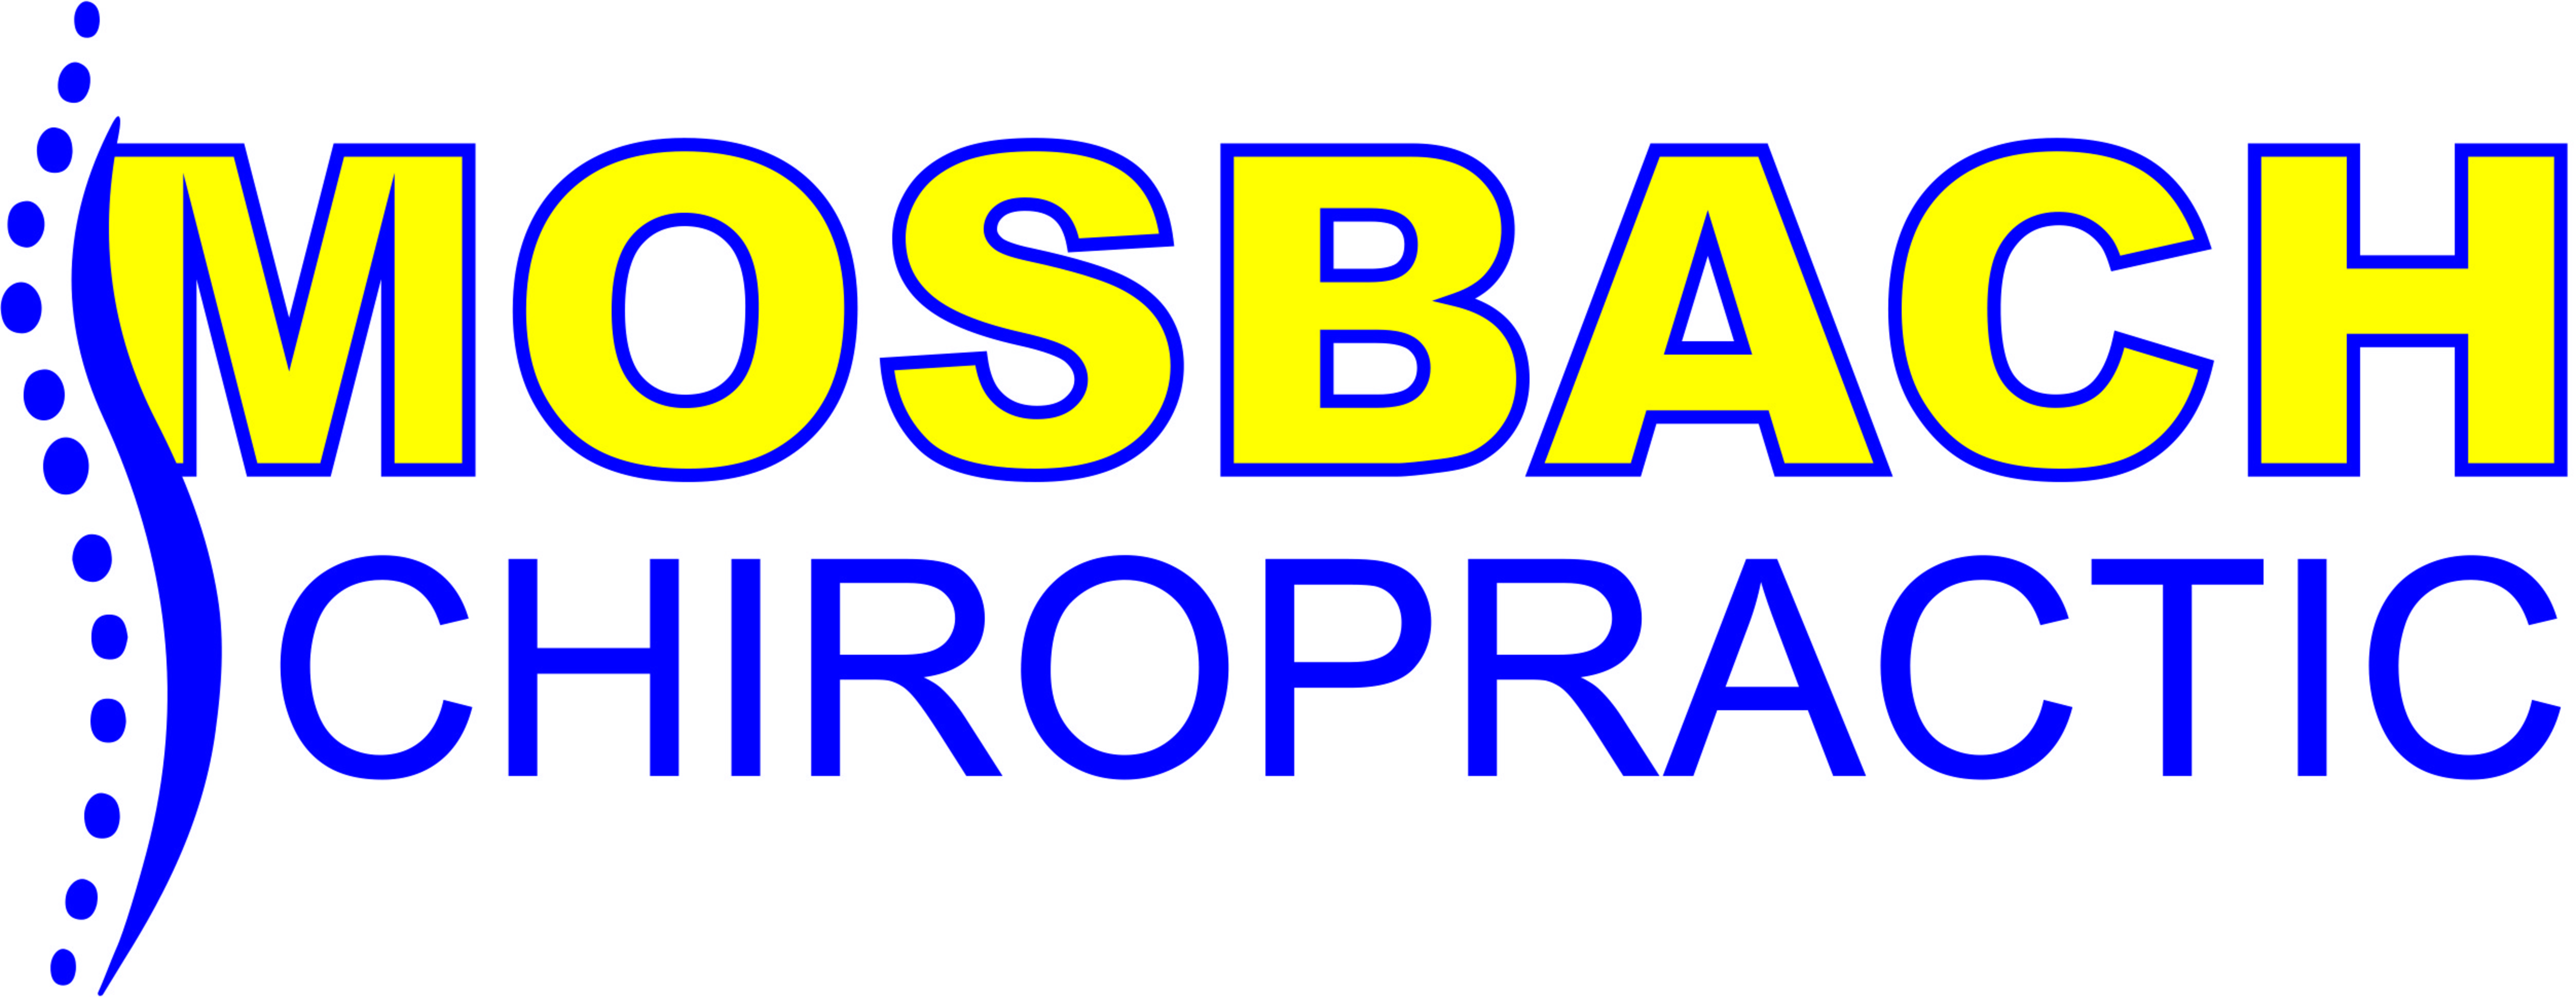 Mosbach Logo For Advertising